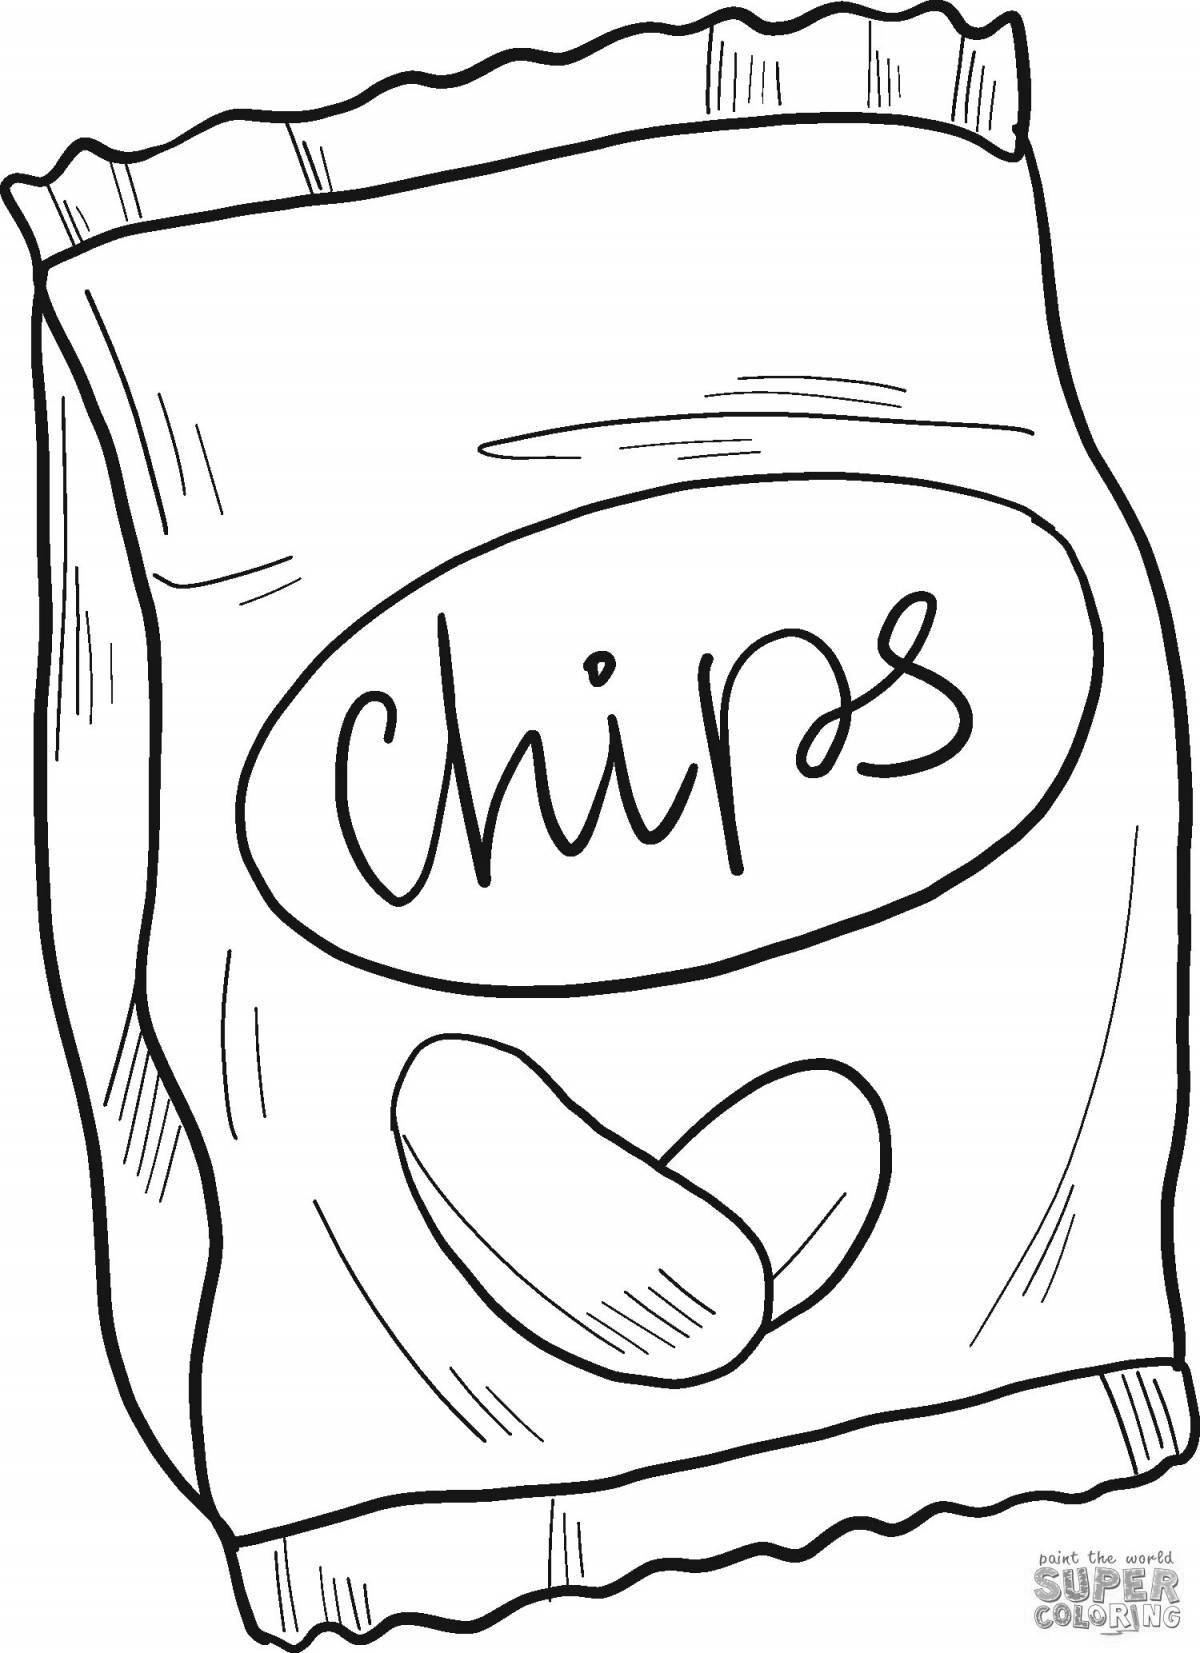 Cola and chips coloring book